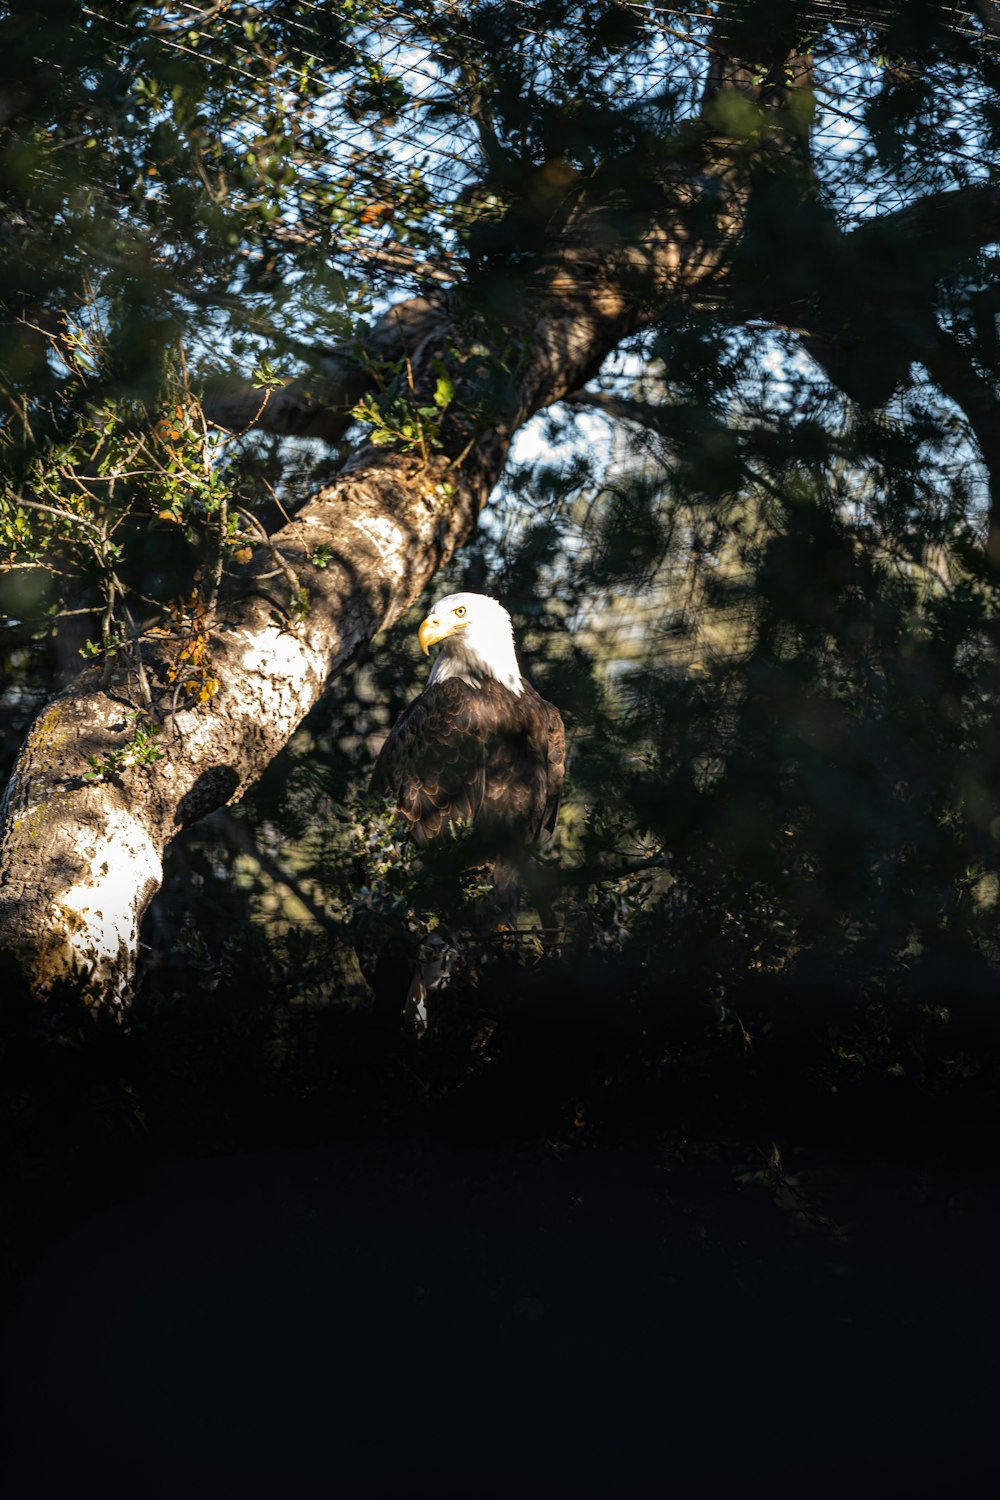 an eagle is perched on a tree branch